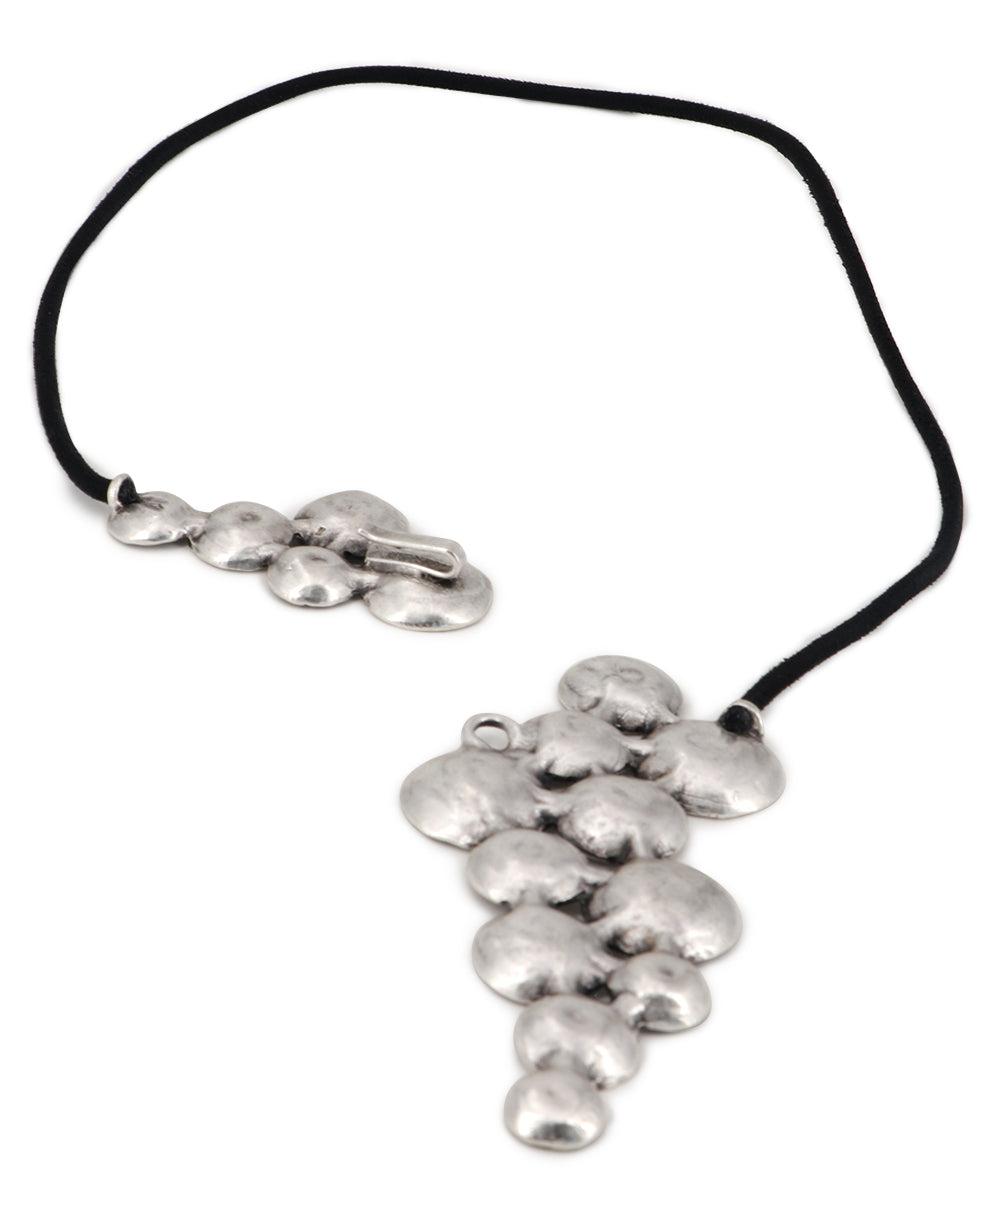 Textured Discs Structured Pewter Necklace